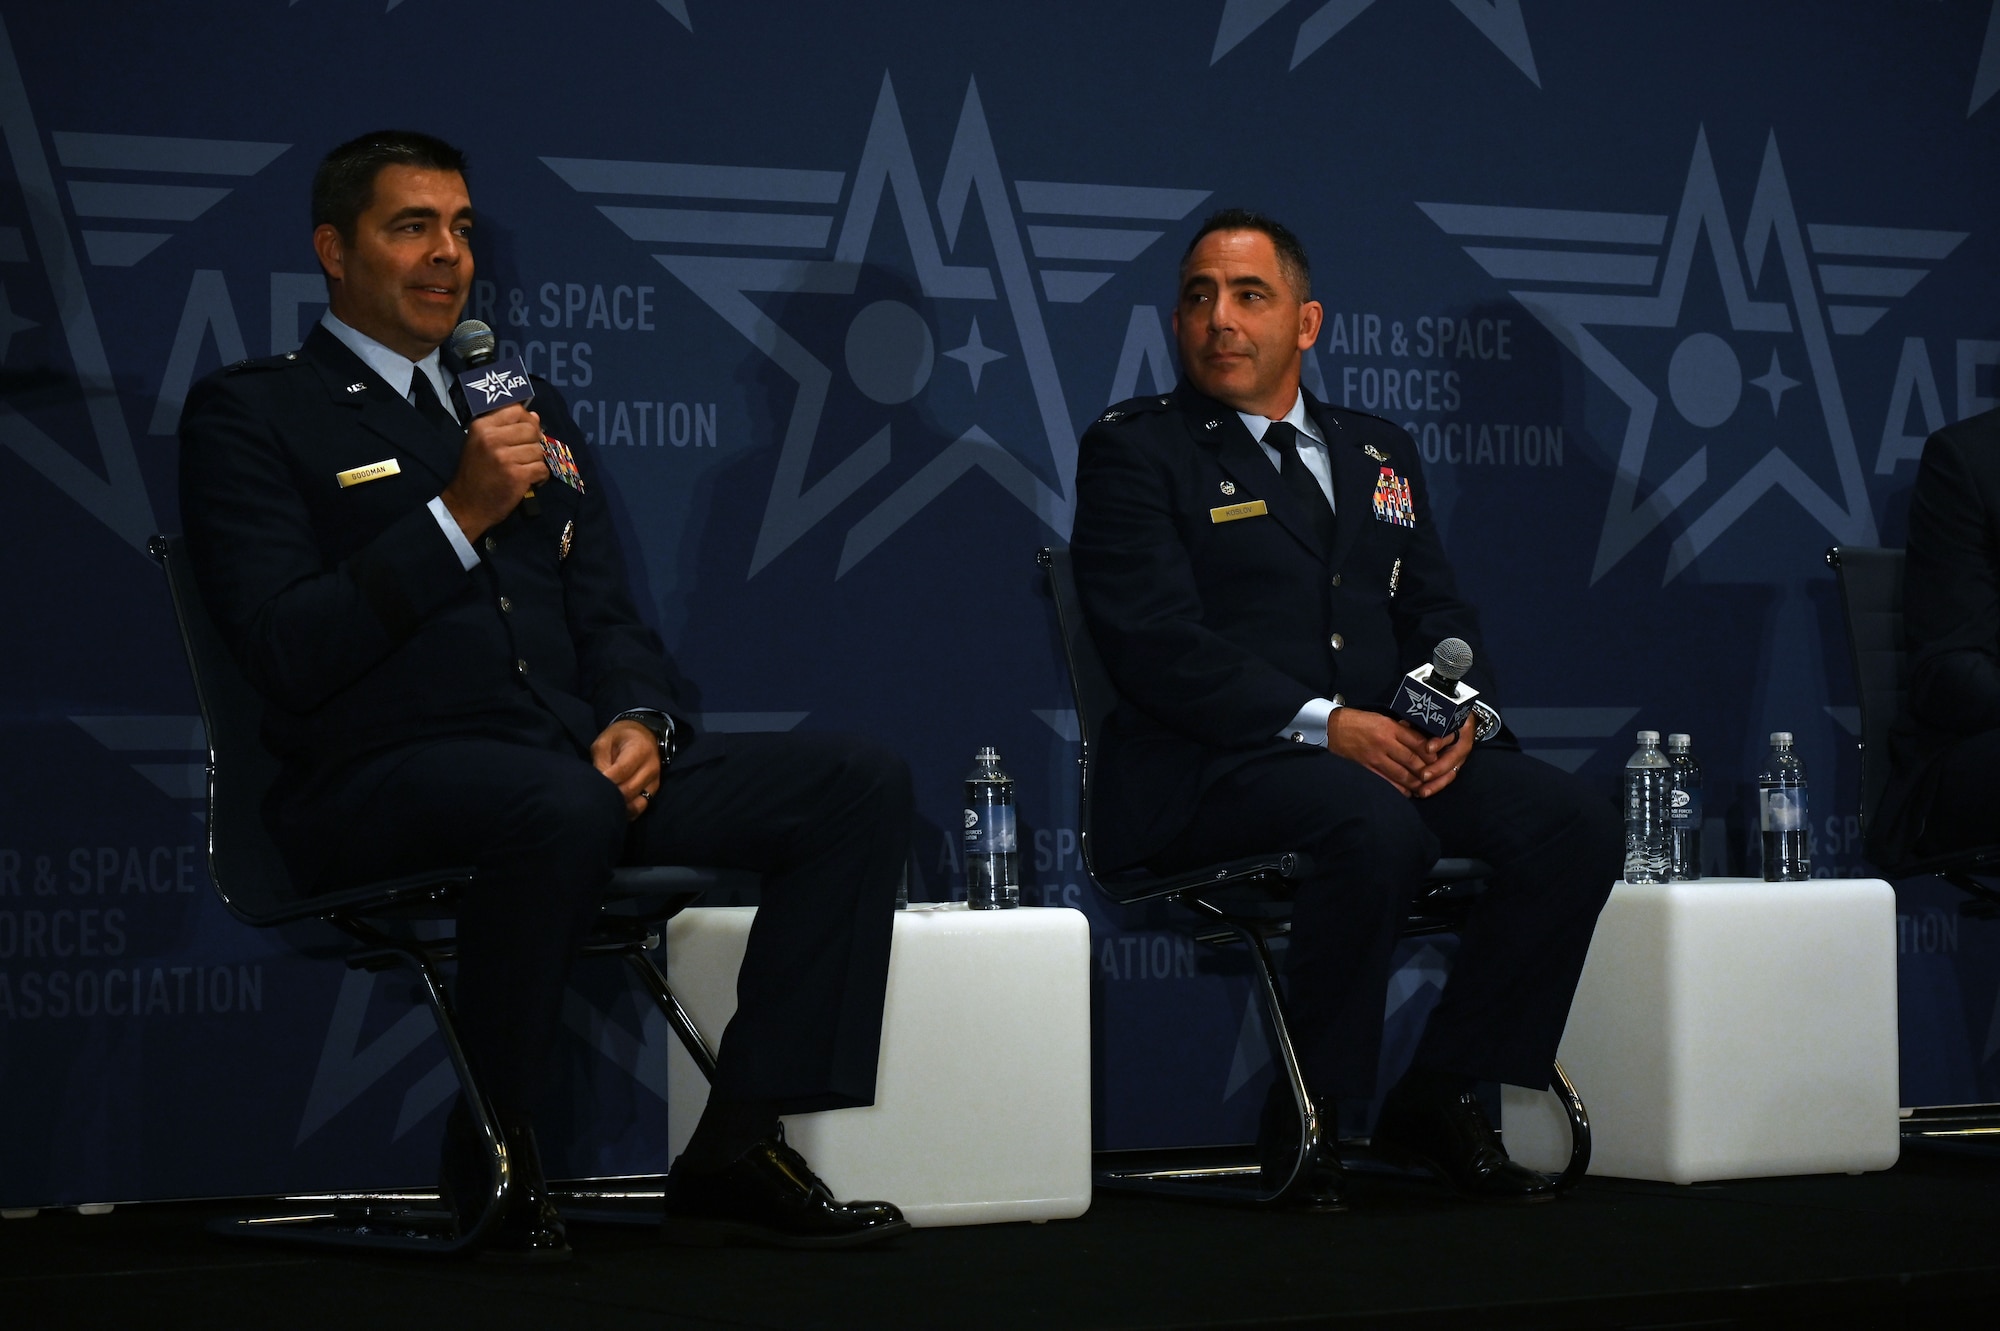 U.S. Air Force Brig. Gen. Richard Goodman, 57th Wing commander, left, U.S. Air Force Col. Josh Koslov, 350th Spectrum Warfare Wing commander, right, serve as panelist for the Spectrum Renaissance session  the Air & Space Forces Association’s (AFA) Air, Space & Cyber Conference at the Gaylord National Resort & Convention Center in National Harbor, Md., Sept. 13, 2023. During the panel, they discussed how the Spectrum has never been a more congested, contested and constrained domain to operate within. They spoke about the dependability between air assets and the EMS as inseparable and the survivability of Airmen depends on the Air Force achieving and maintaining EMS superiority. (U.S. Air Force photo by Staff Sgt. Ericka A. Woolever)